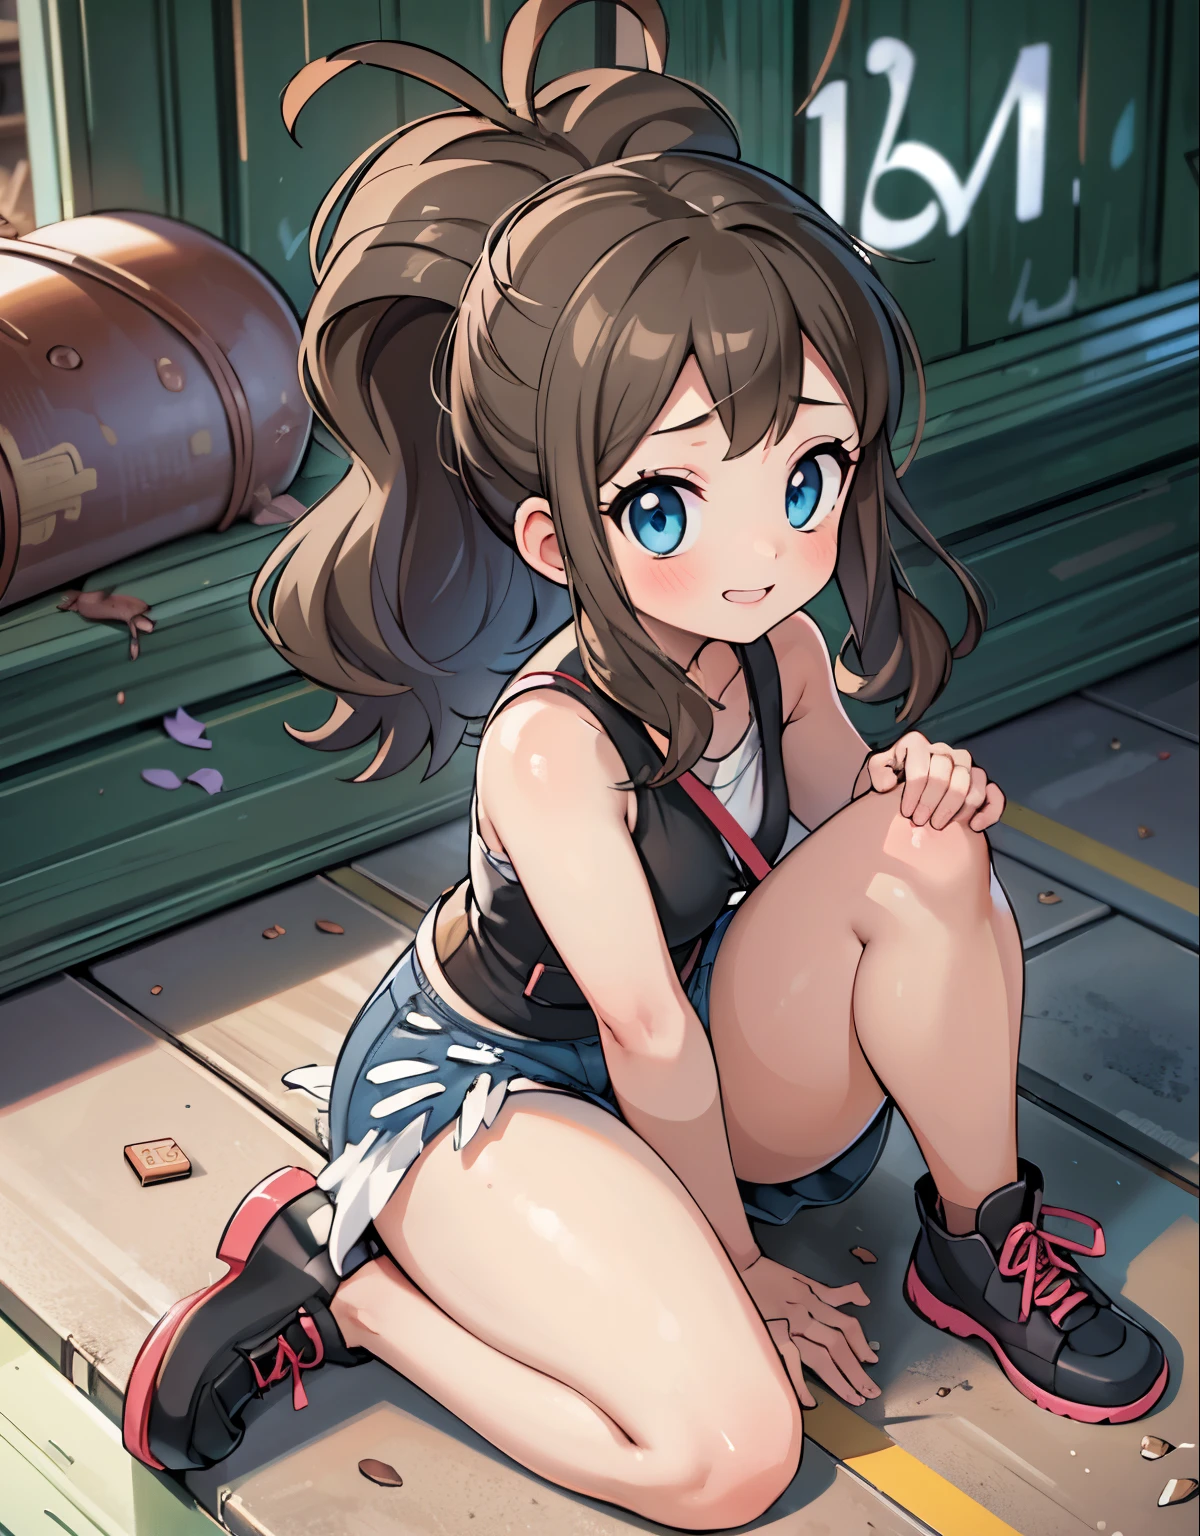 (best quality, highres, masterpiece:1.2), ultra-detailed, realistic:1.37, sketches, hilda pokemon, def1, curvy girl, legs together, curvy, visible thighs, chubby thighs, thighs in the foreground, body shape, sitting in a bench, Alone in a abandoned warehouse, dirty place, beer bottles, trash on the floor, graffiti on the wall, watched by a crowd of men, they observe her body, vibrant colors, nervous look, fearful, afraid, timorous smile, looking_at_viewer, bis ass, wide hips, fullbody, high angle shot, high angle, she tries to hide her thighs with her hands